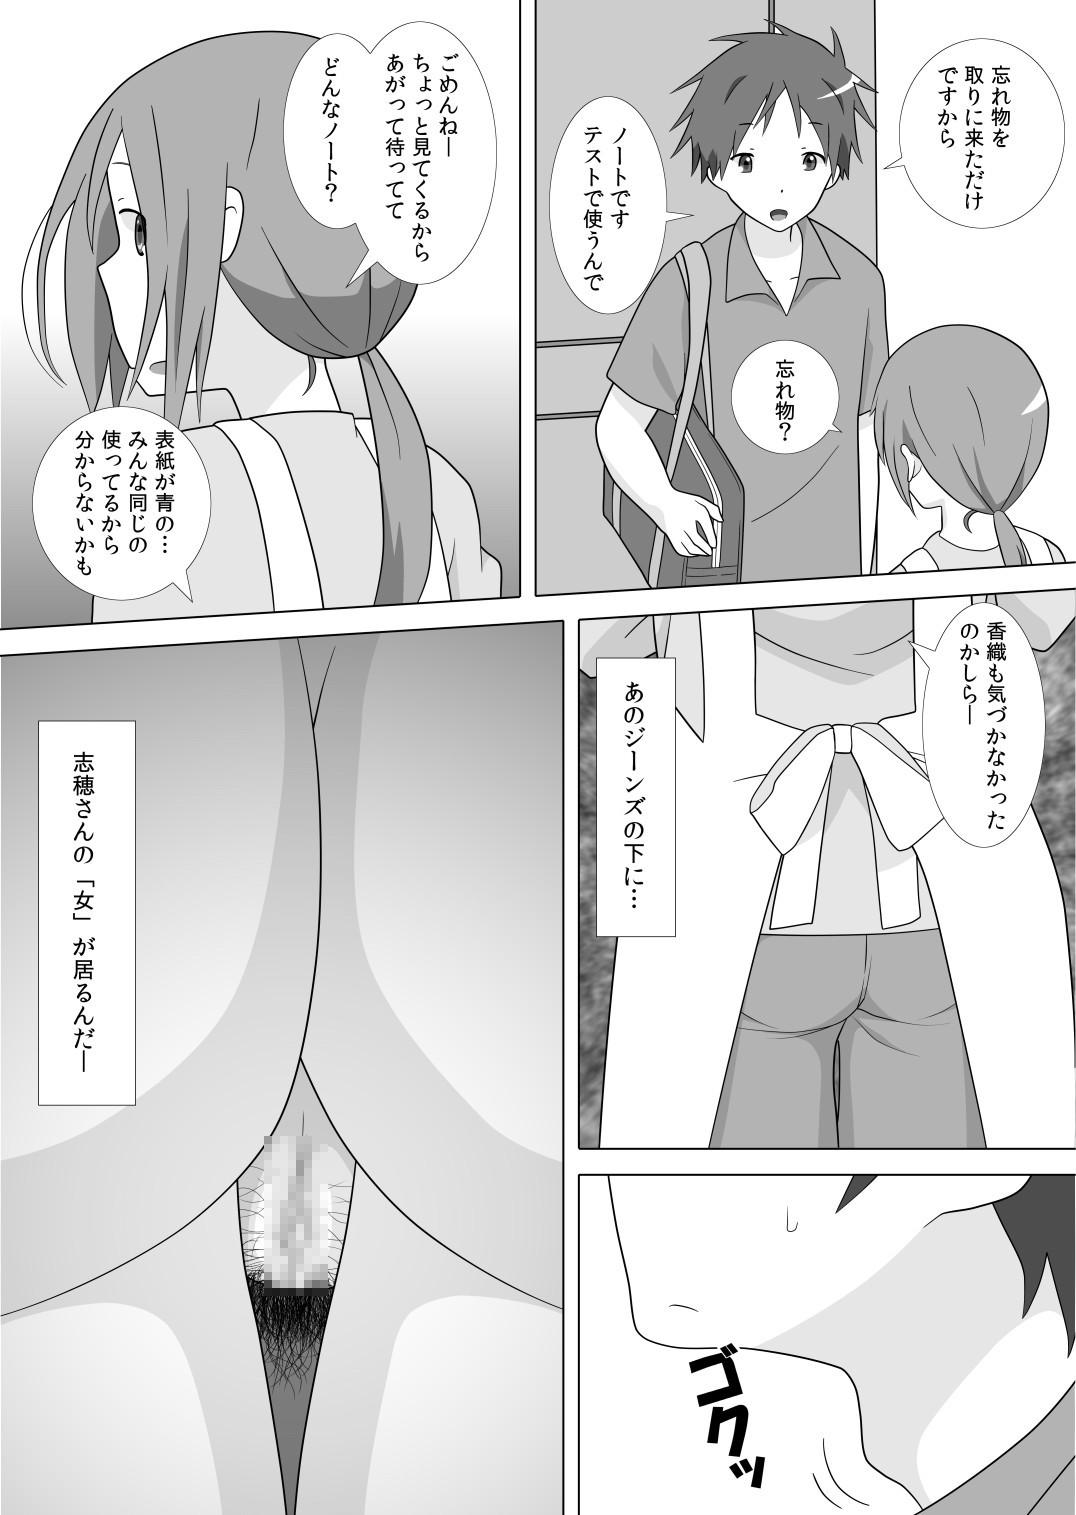 Daddy さぁこれから Episode: 1 - One week friends Transsexual - Page 5